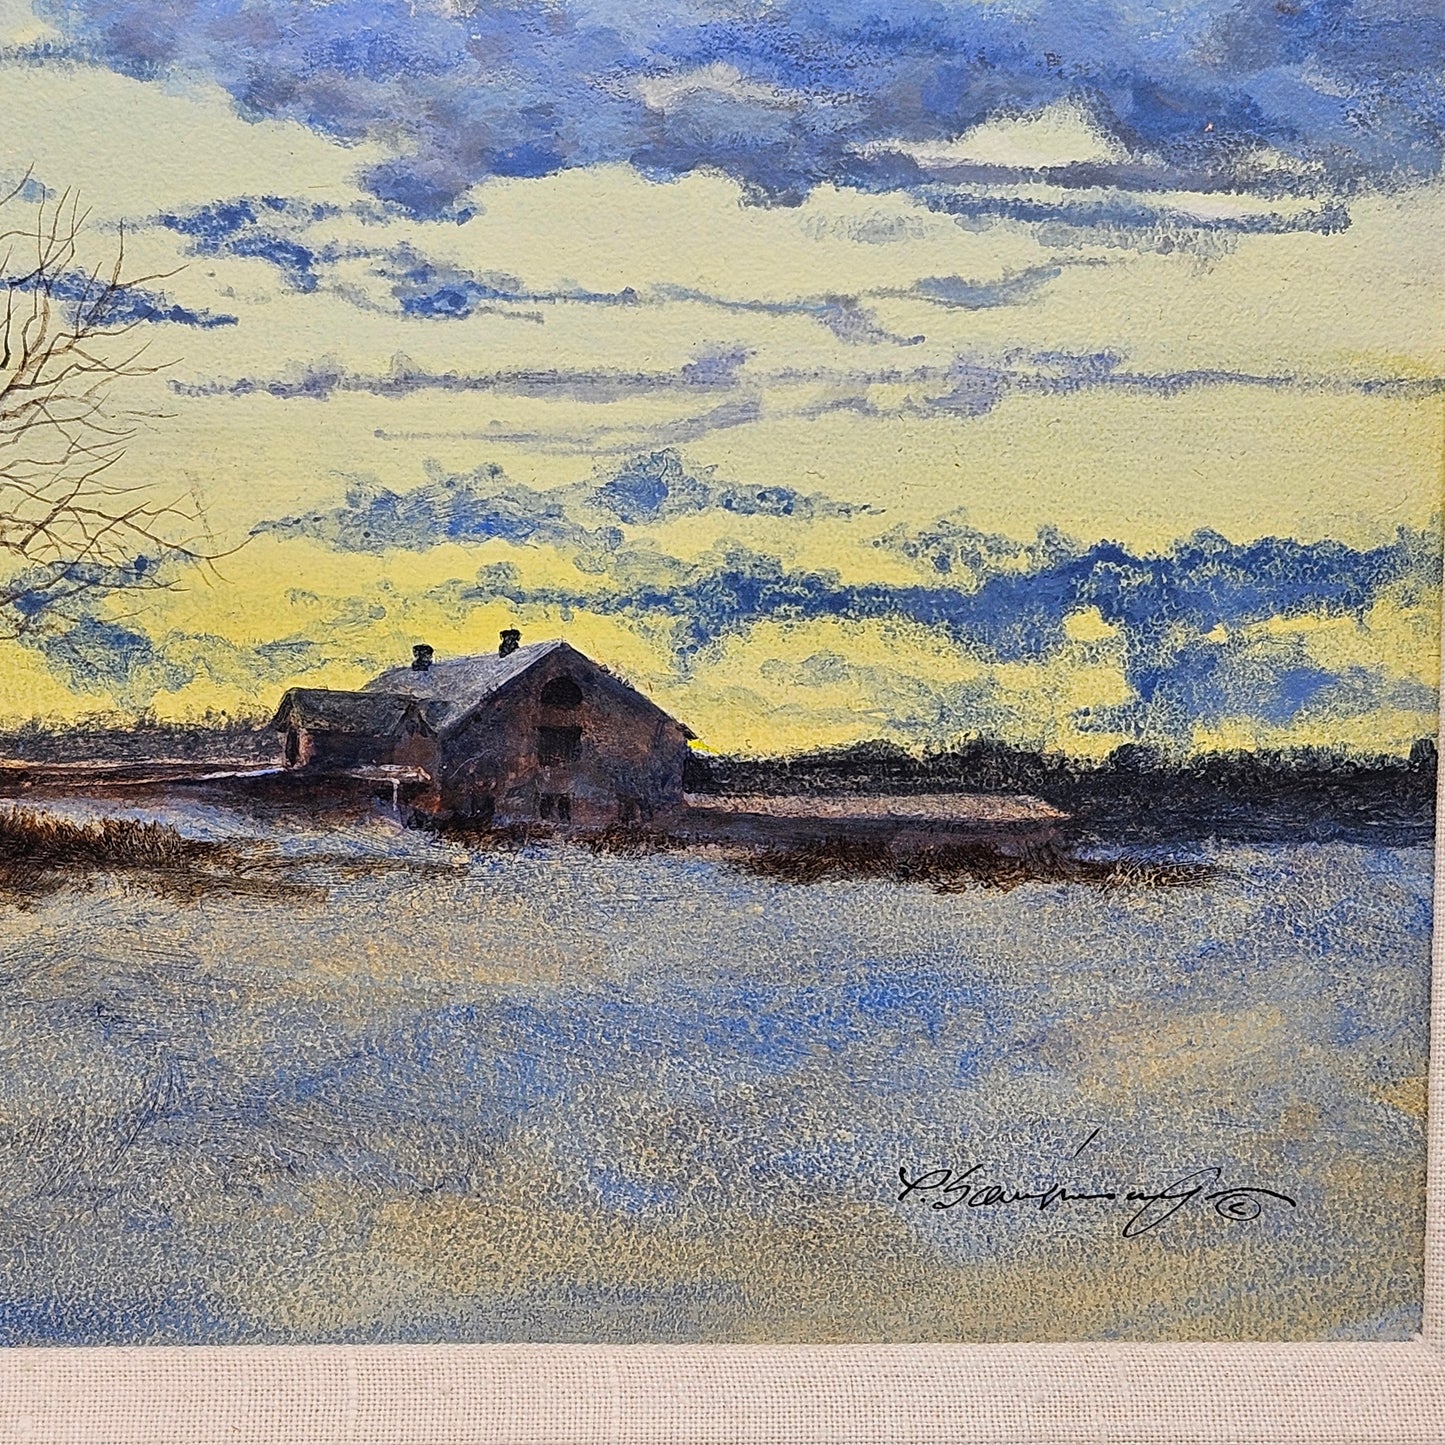 Vintage Acrylic on Board Painting of Paul Scarborough "Blue Ball Barn"